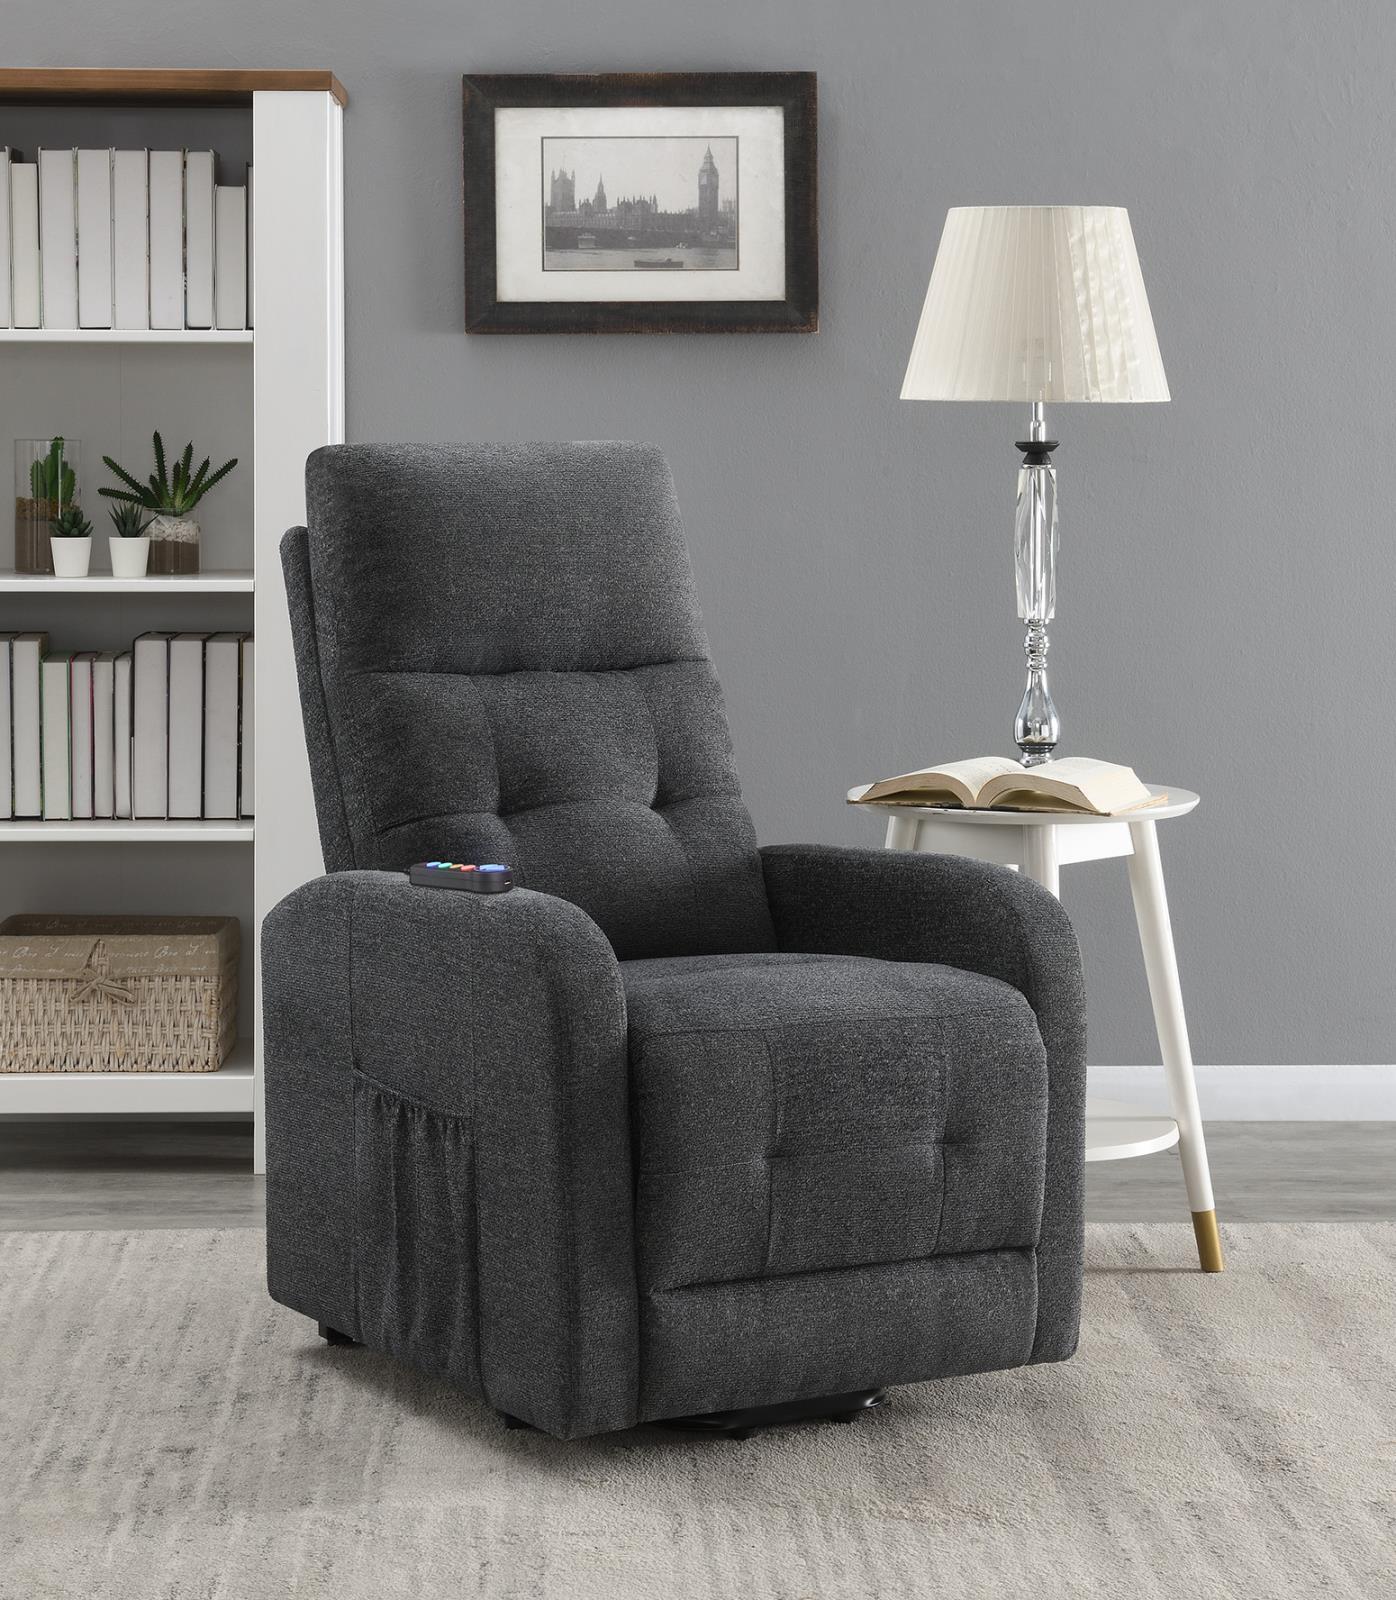 Howie Tufted Upholstered Power Lift Recliner Charcoal - Half Price Furniture